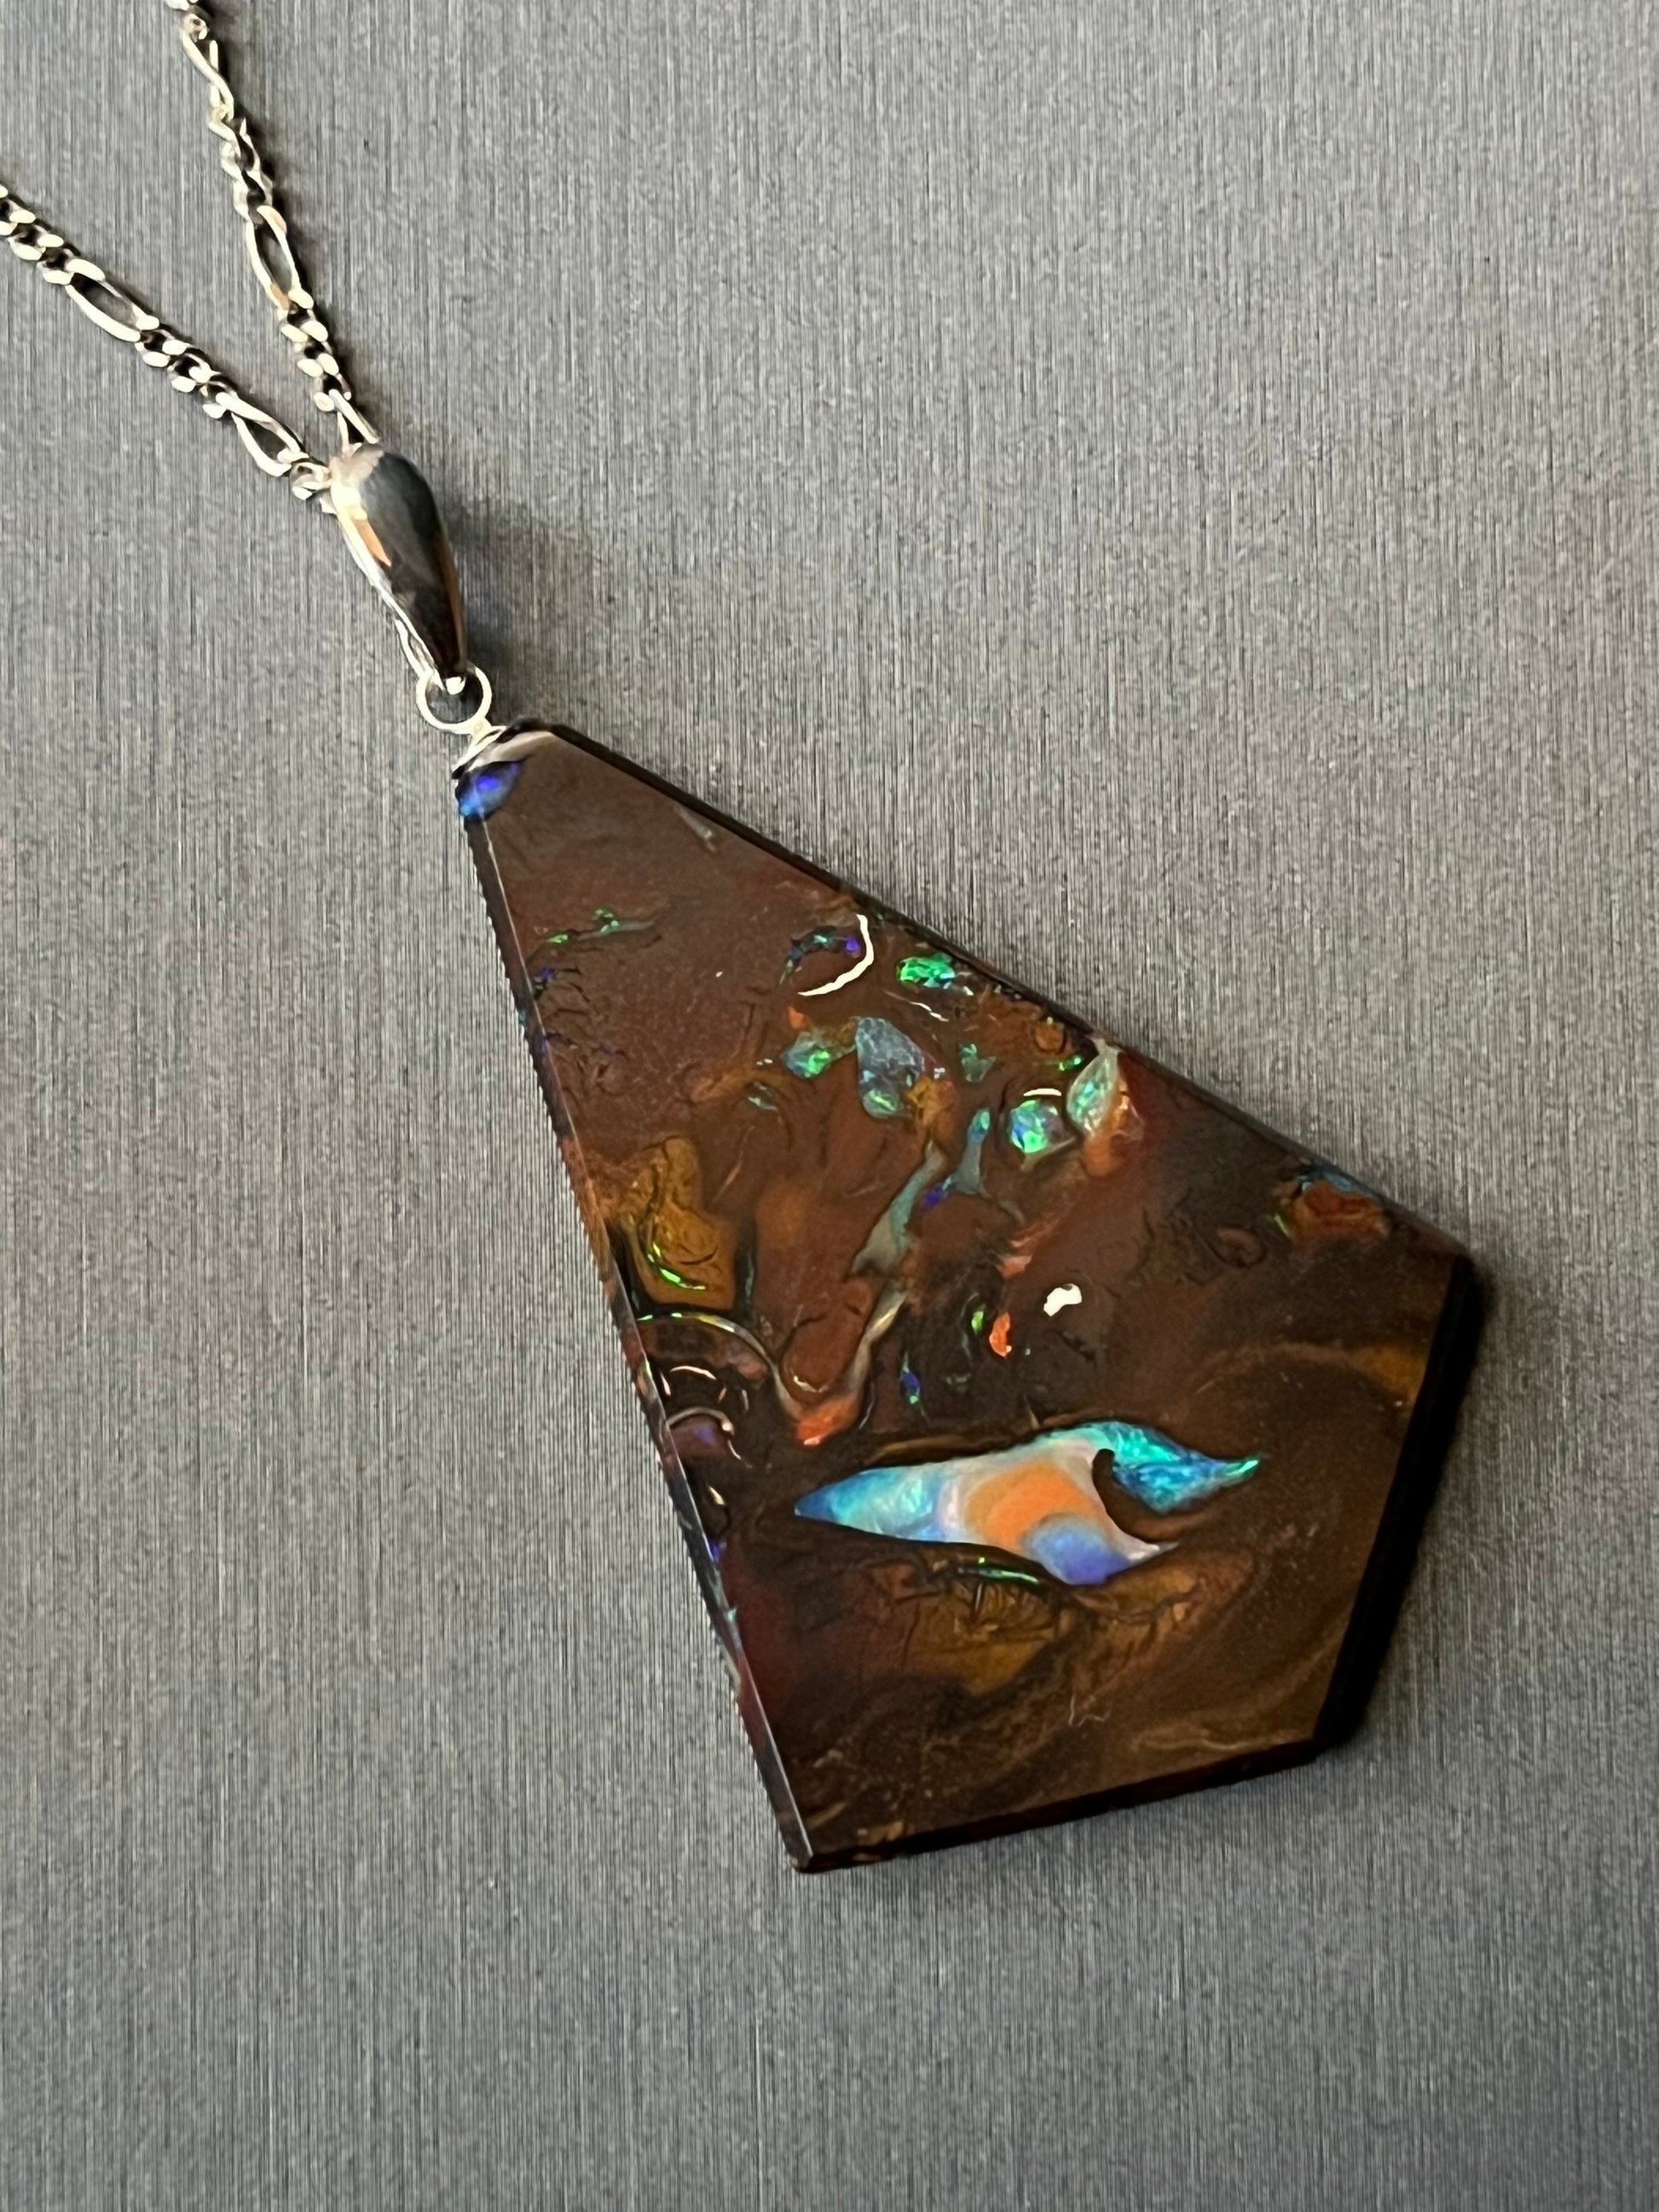 Australian Korite Opal pendant on silver, cut to maximize the beauty of the veins. This unique piece of jewelry is authentic Alaska Native art created by an enrolled member of an Alaska Native tribe. Certified Silver Hand and Made in Alaska jewelry.